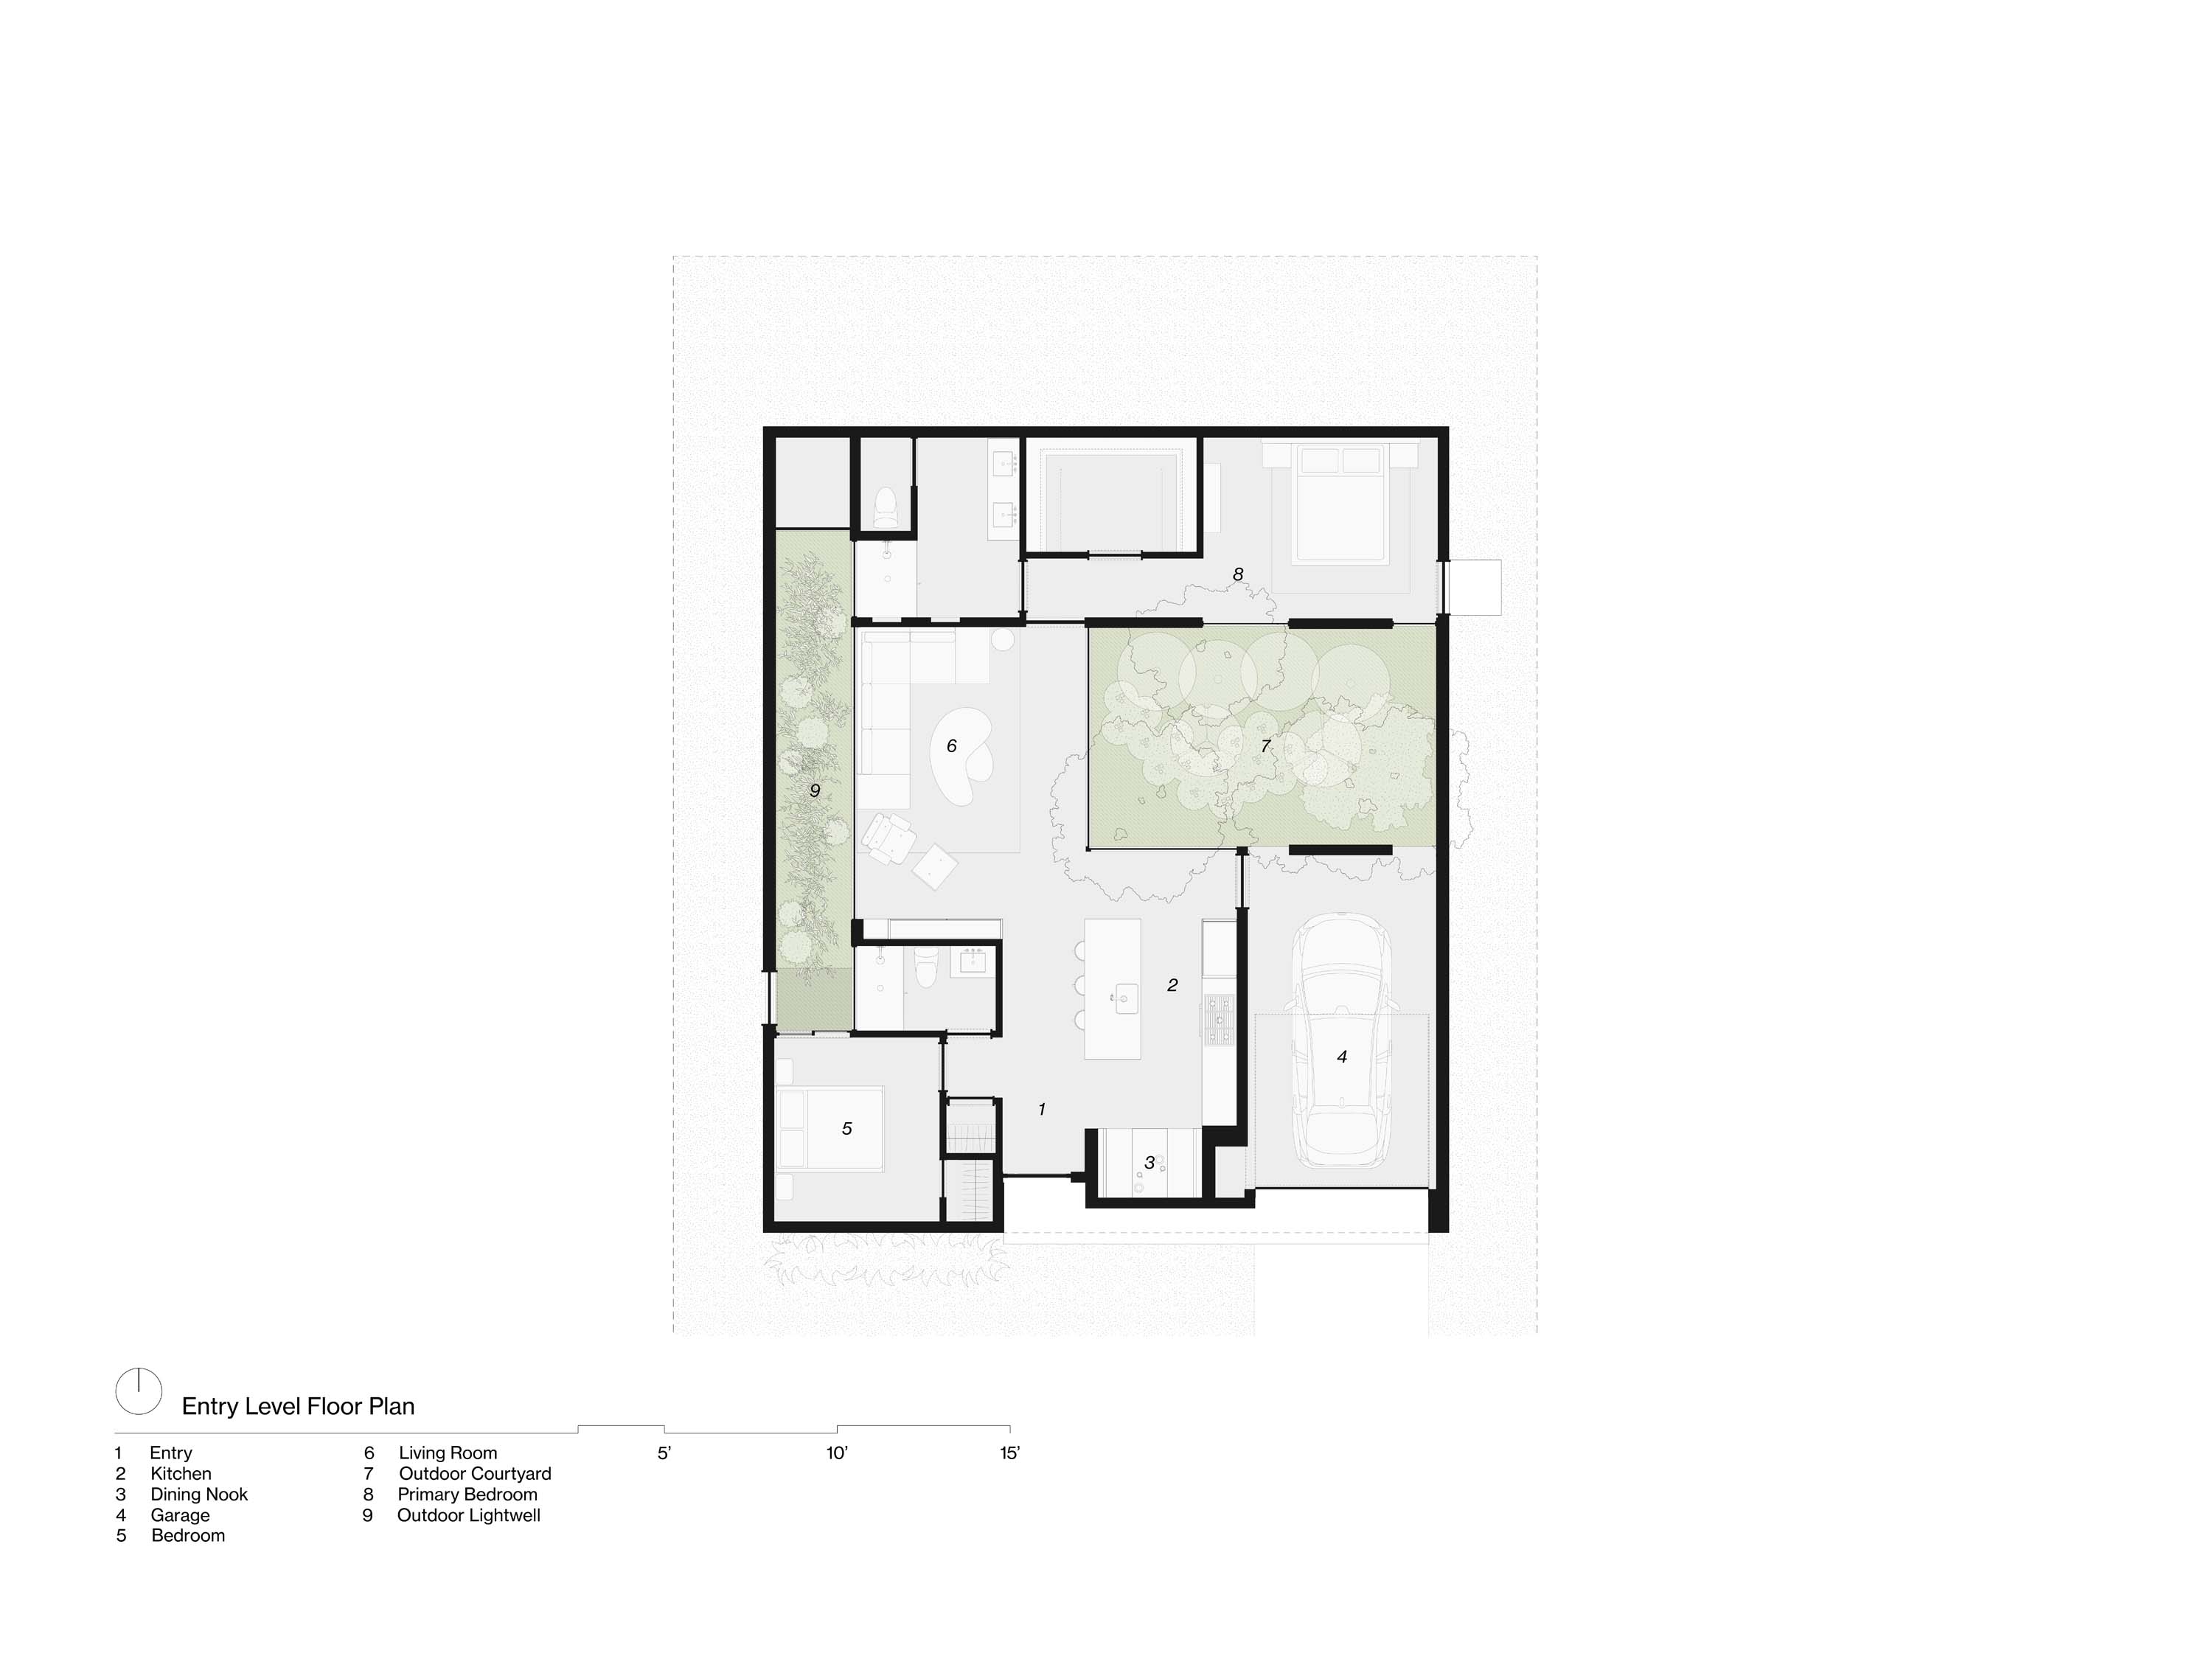 Floor plan of New American House by Specht Novak Architects.